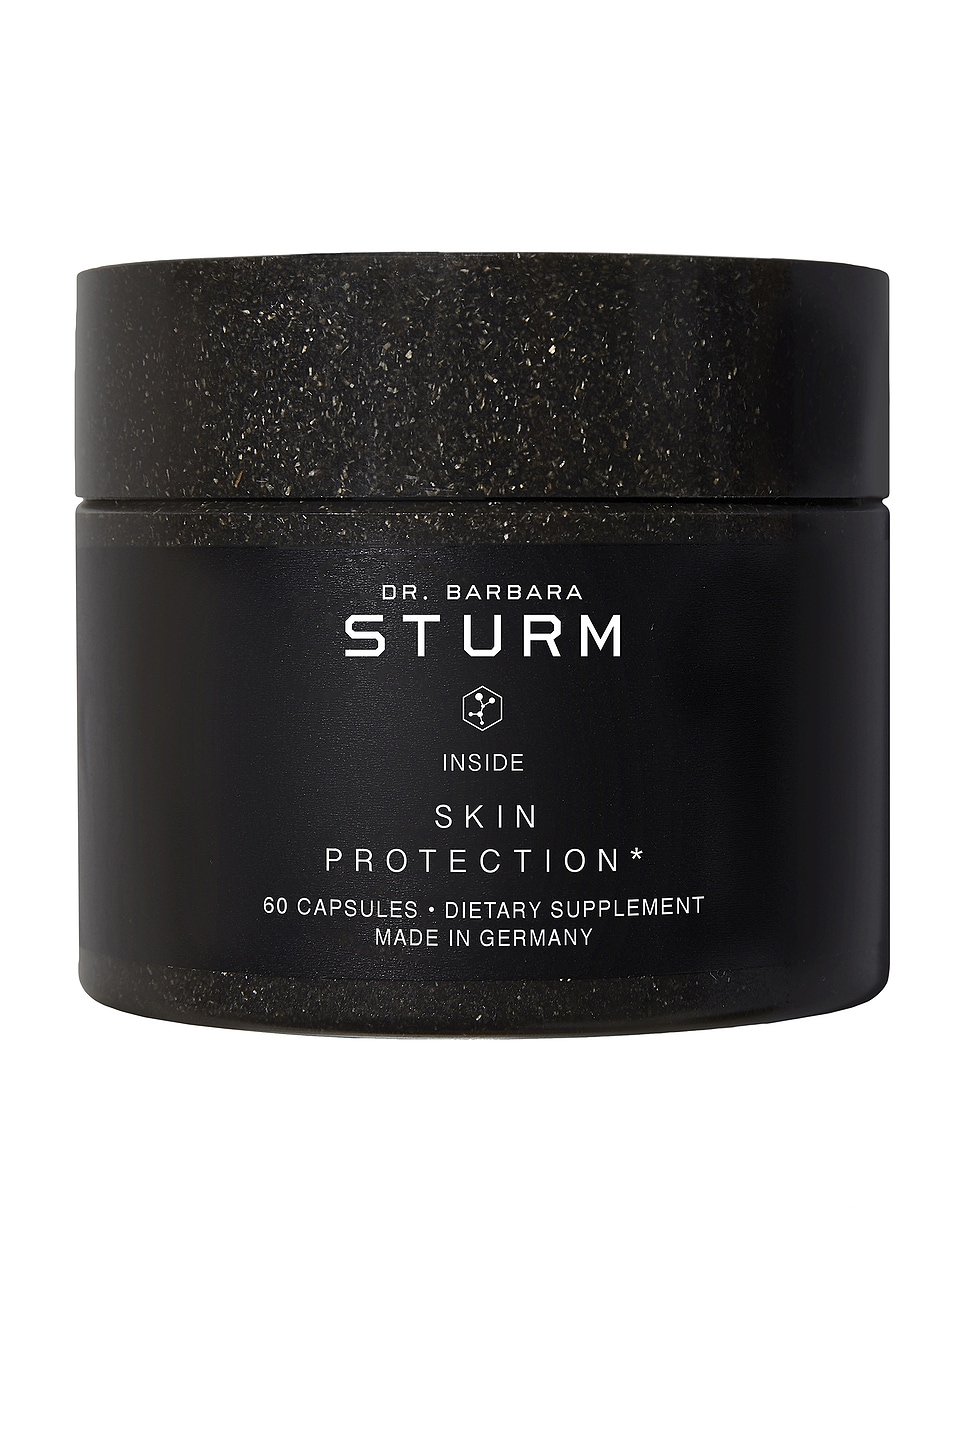 Dr Barbara Sturm Skin Protection Supplements In White